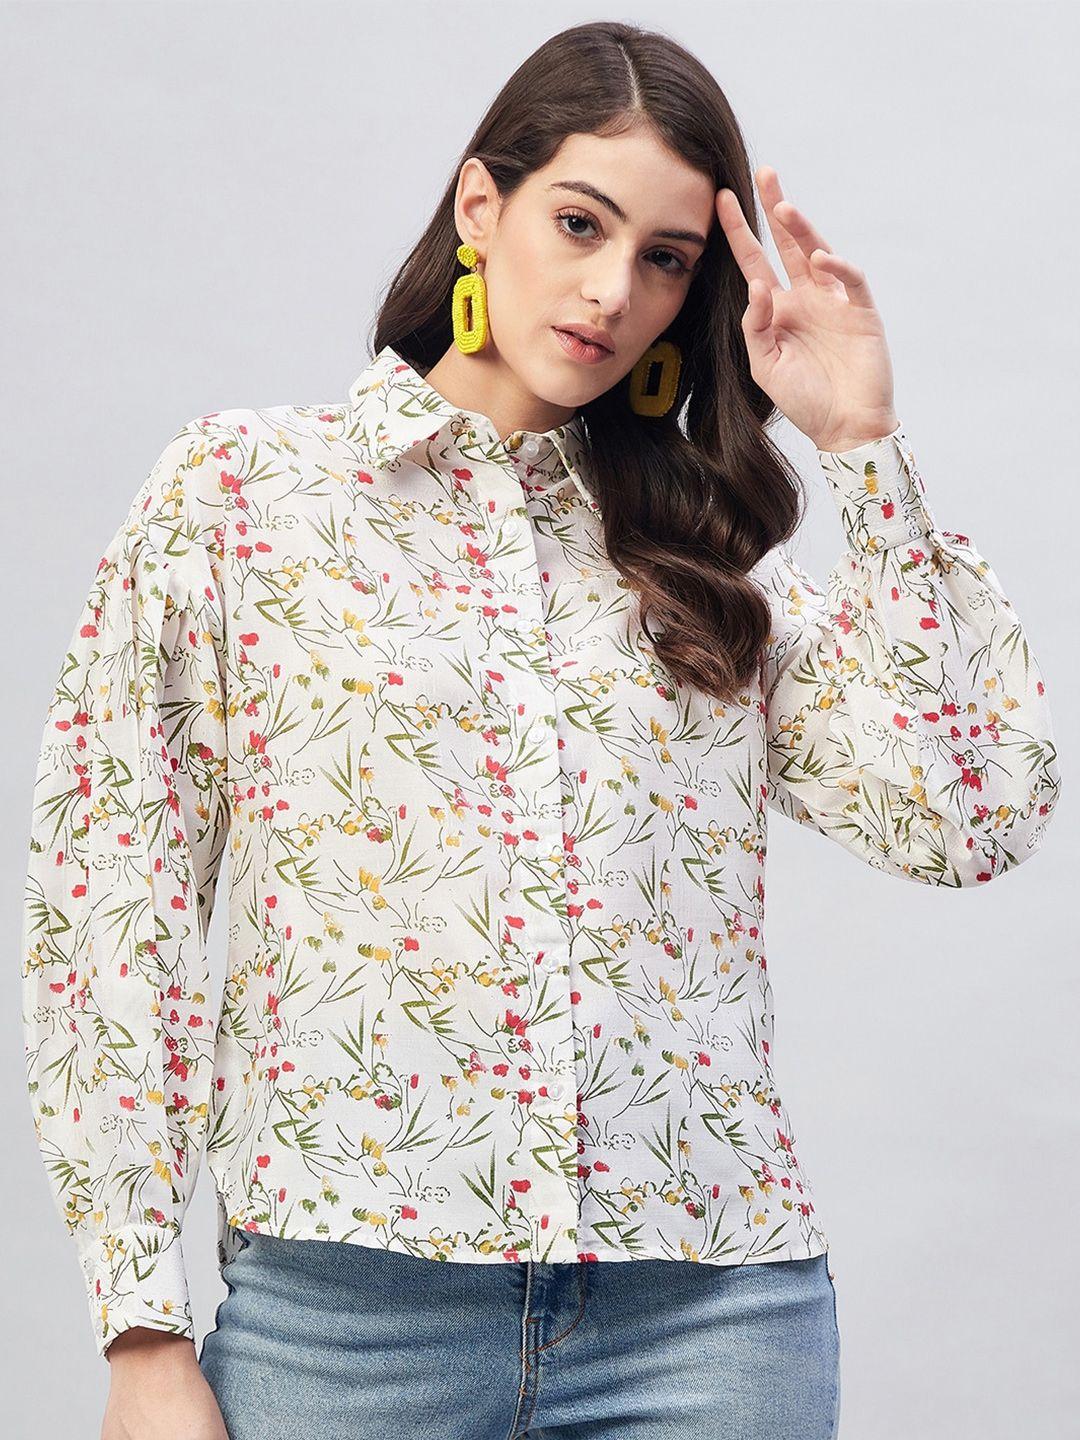 marie claire women floral printed casual shirt